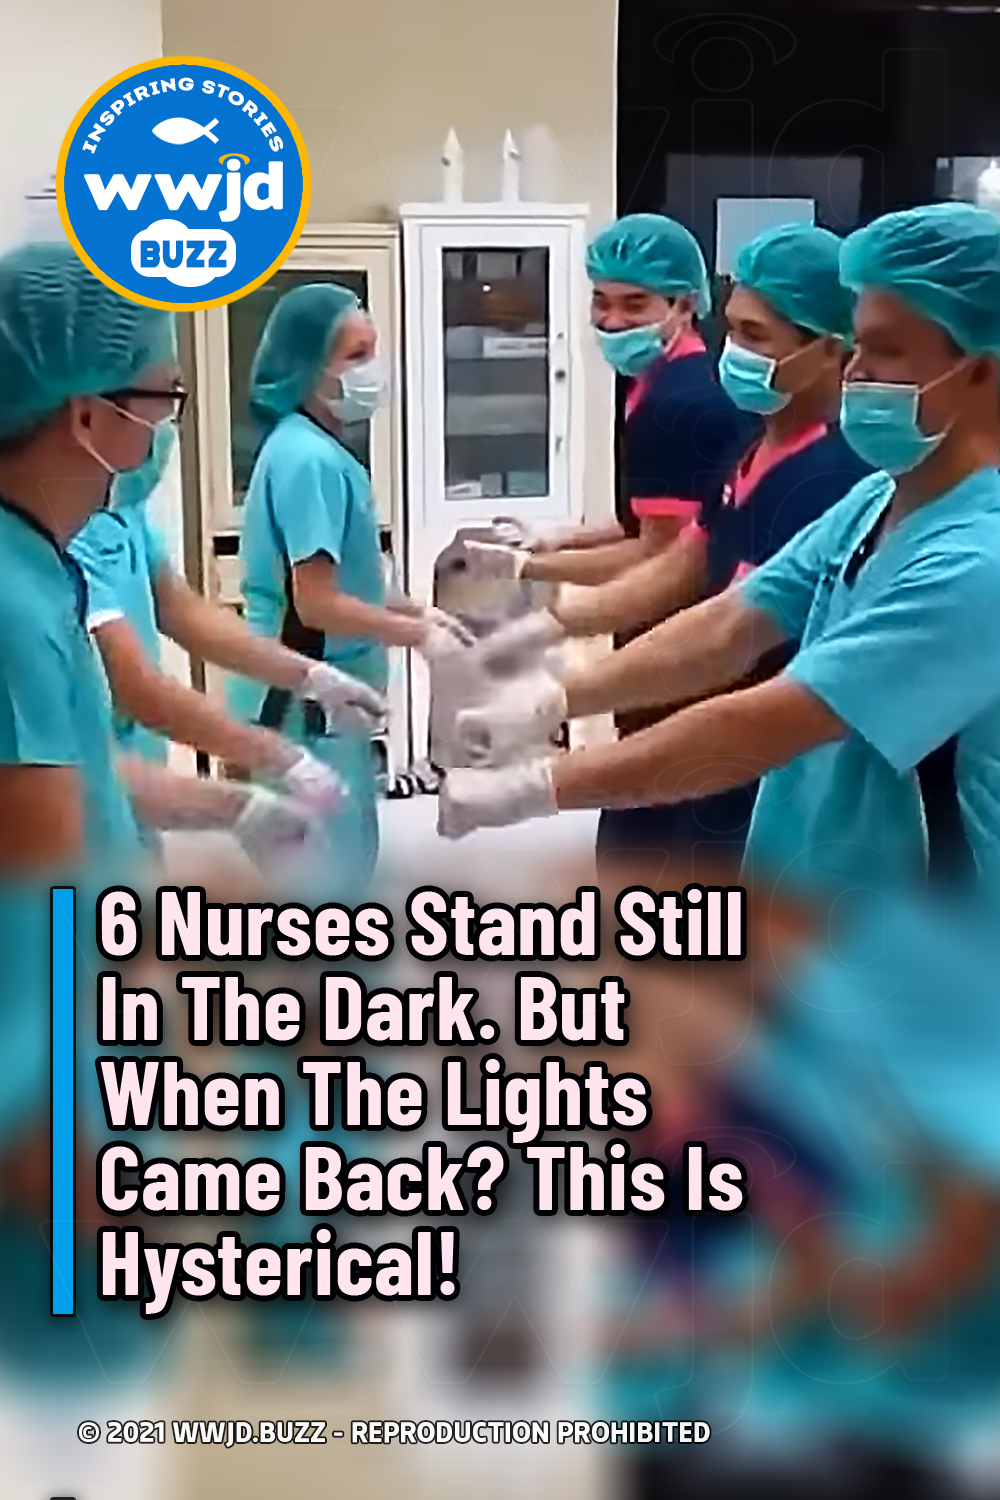 6 Nurses Stand Still In The Dark. But When The Lights Came Back? This Is Hysterical!